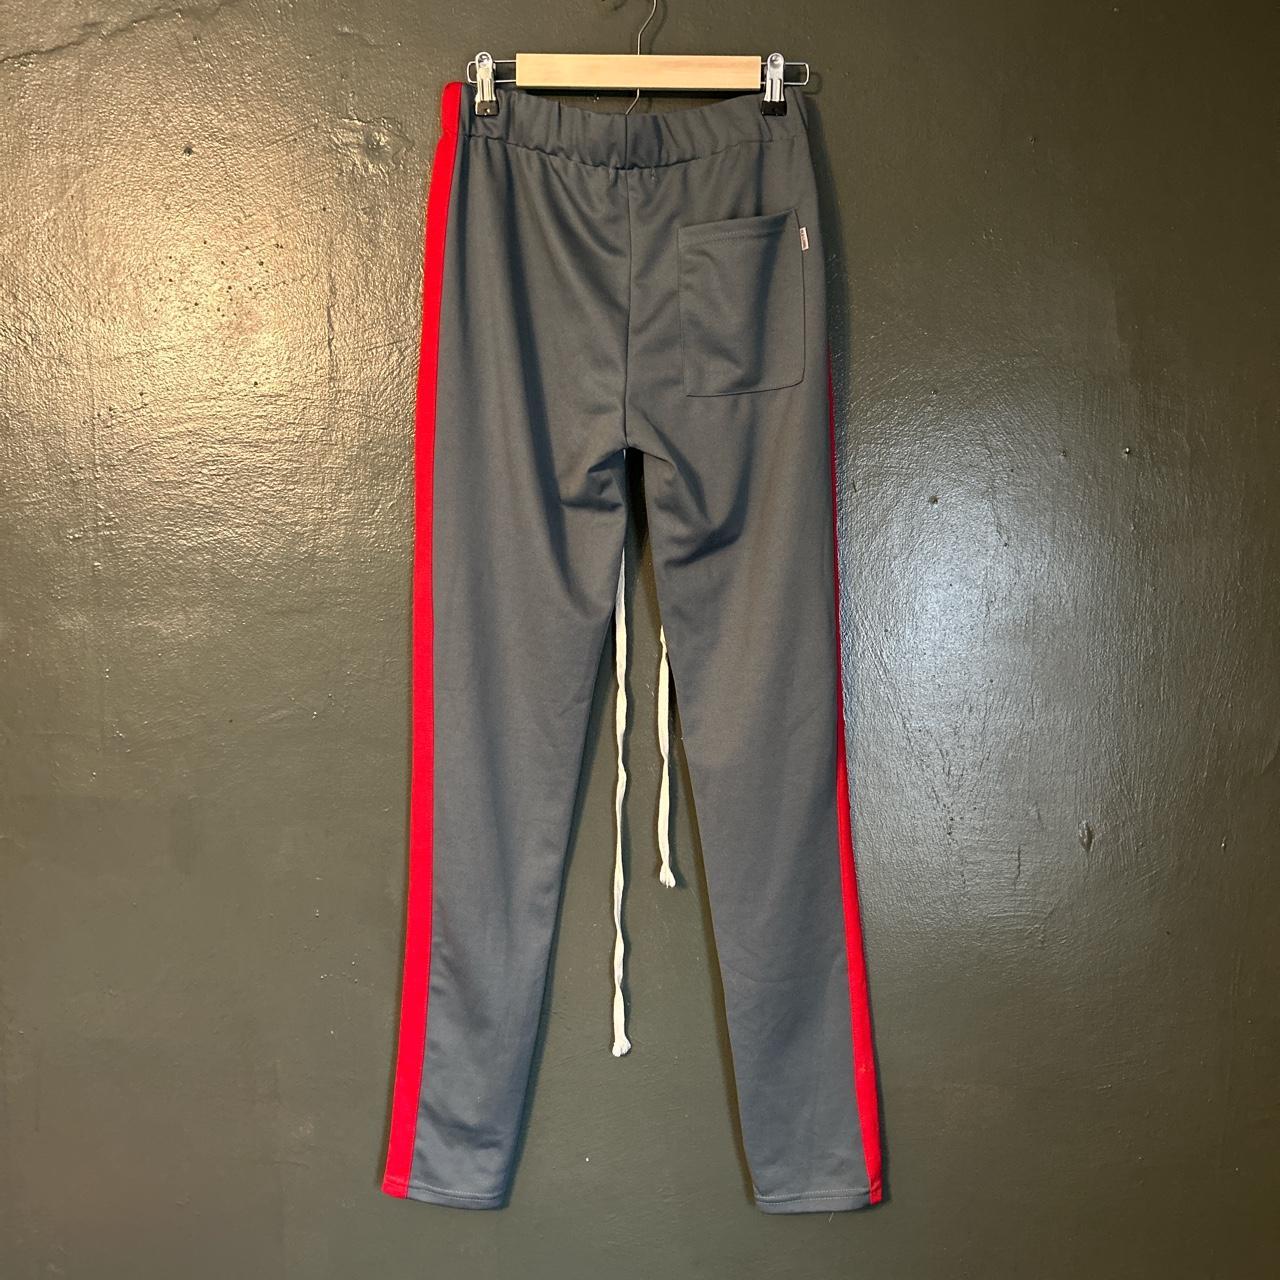 BLK & Bold Men's Grey and Red Joggers-tracksuits (2)